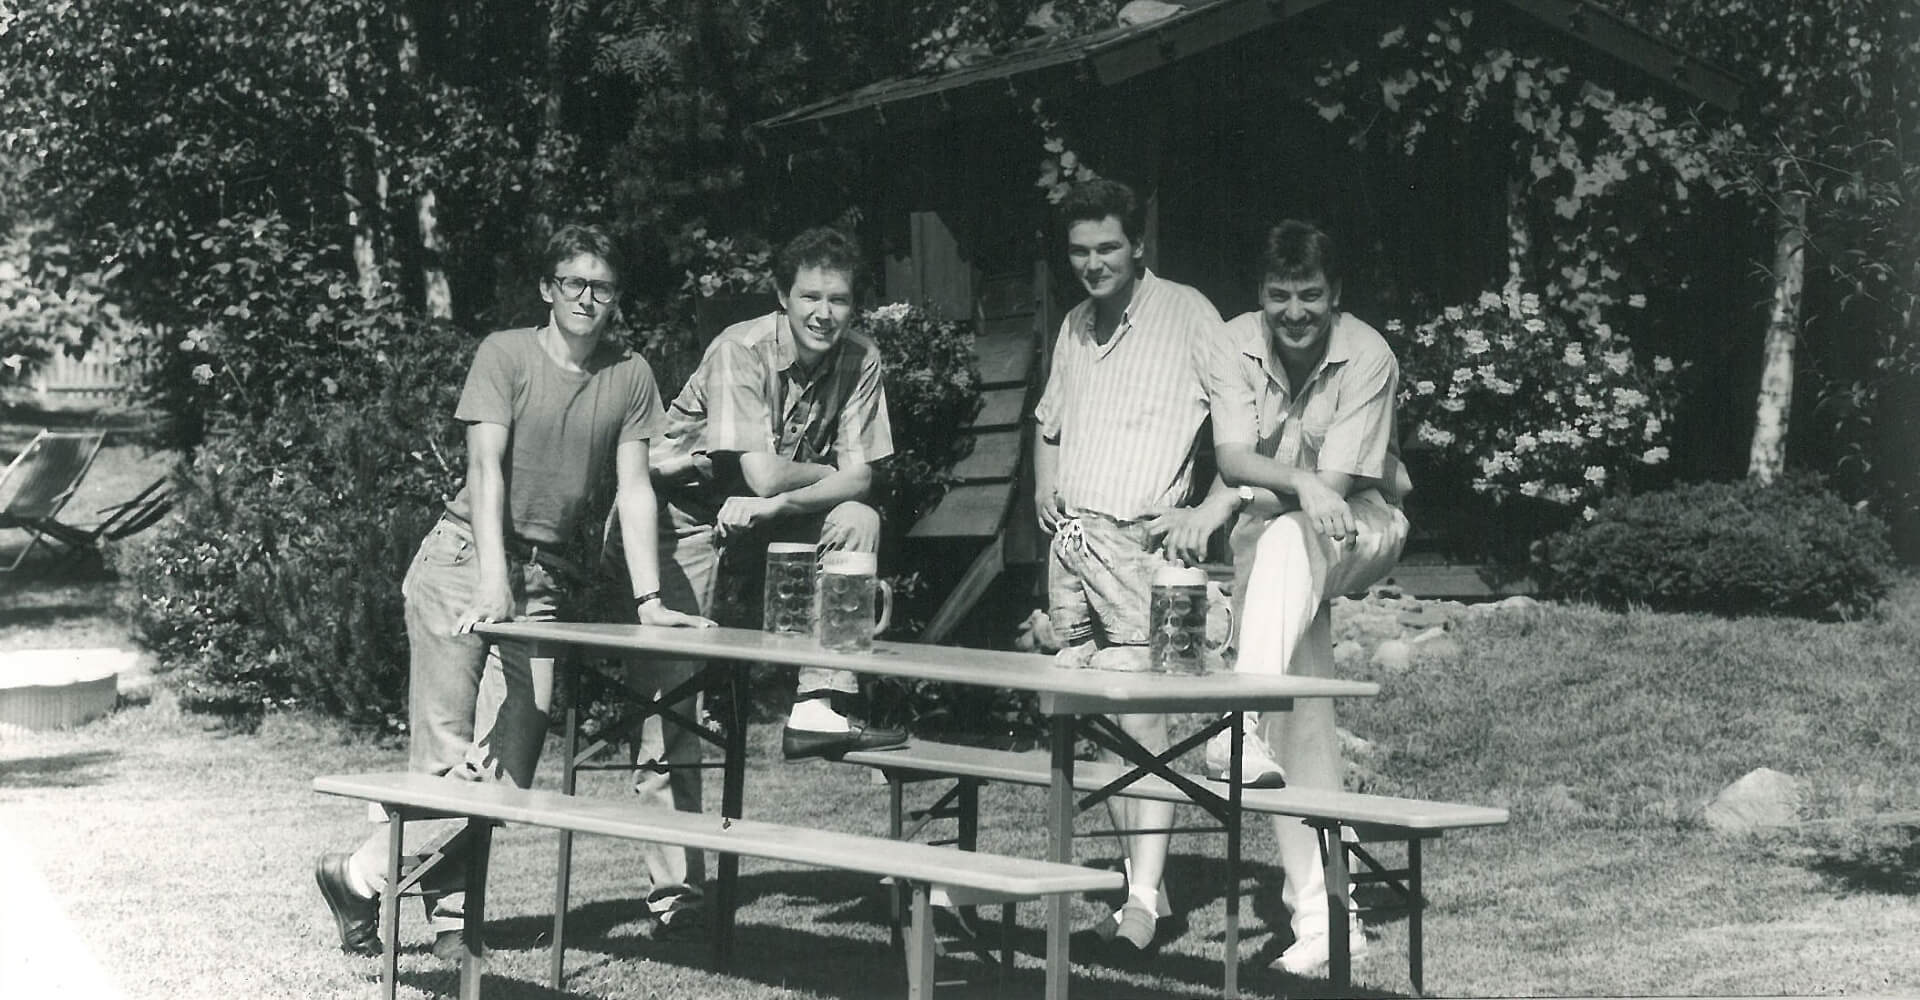  4 people are standing next to a beer table set and this photo is associated with the start of production of beer table sets in 1986.